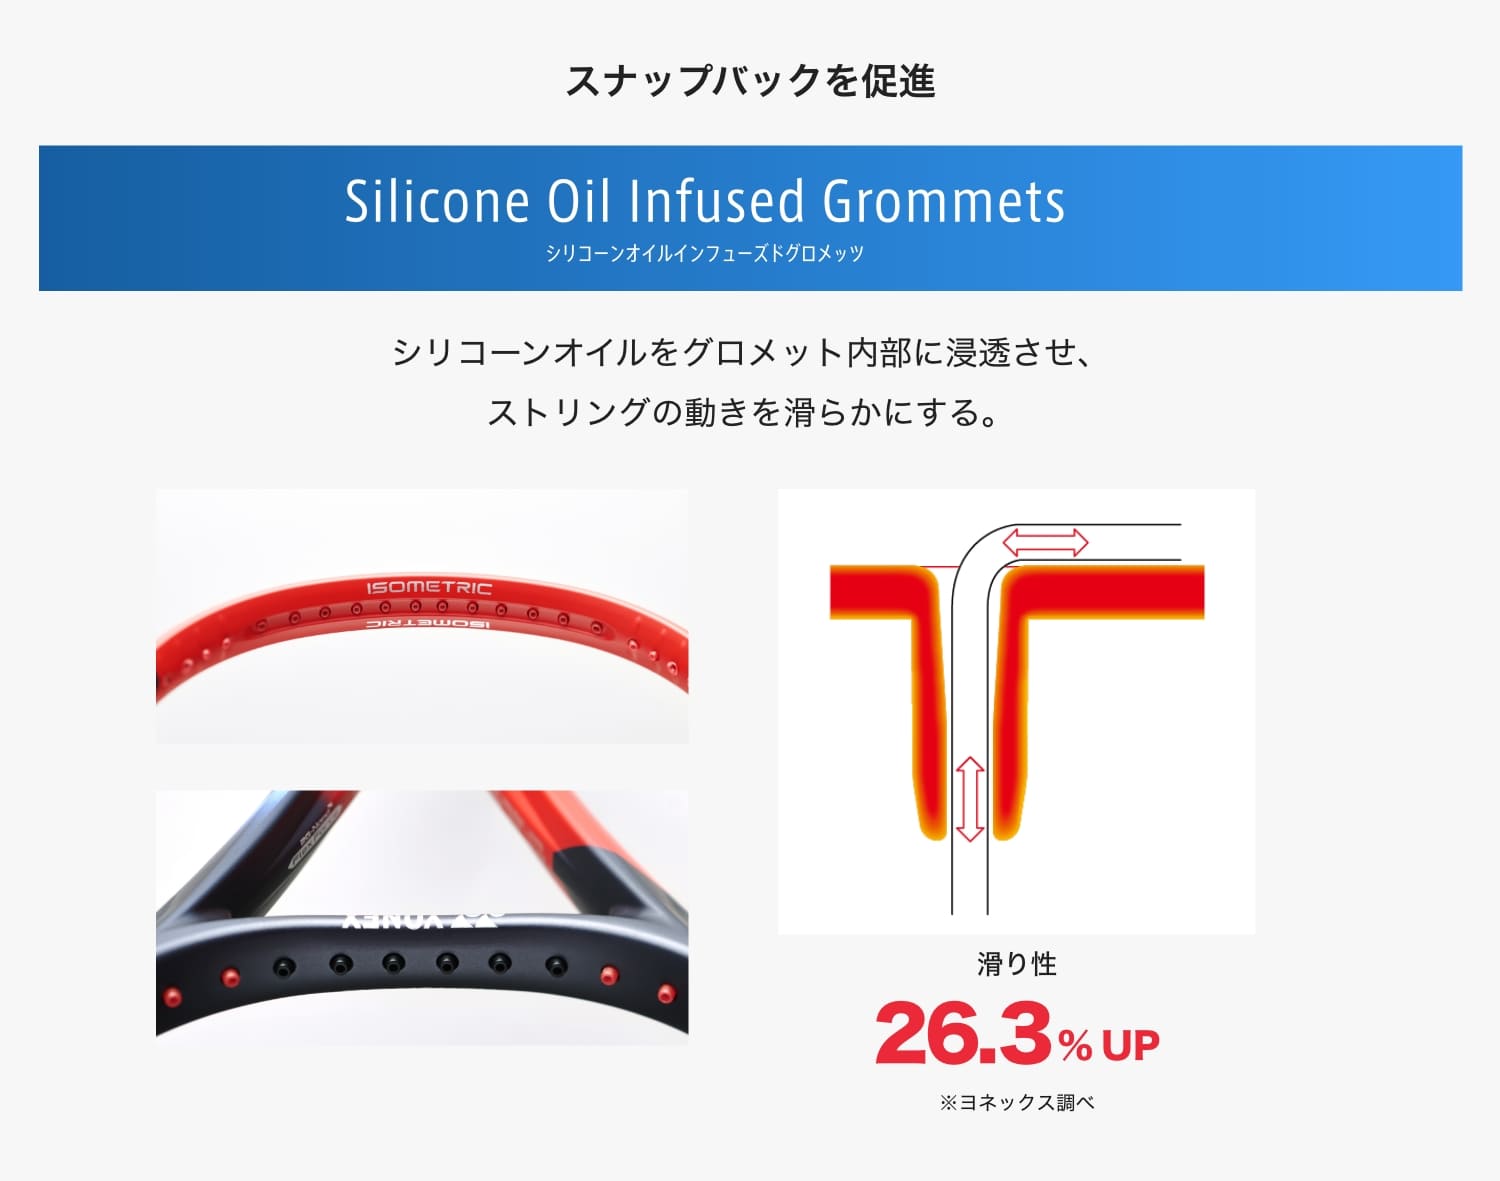 Silicone Oil Infused Grommets